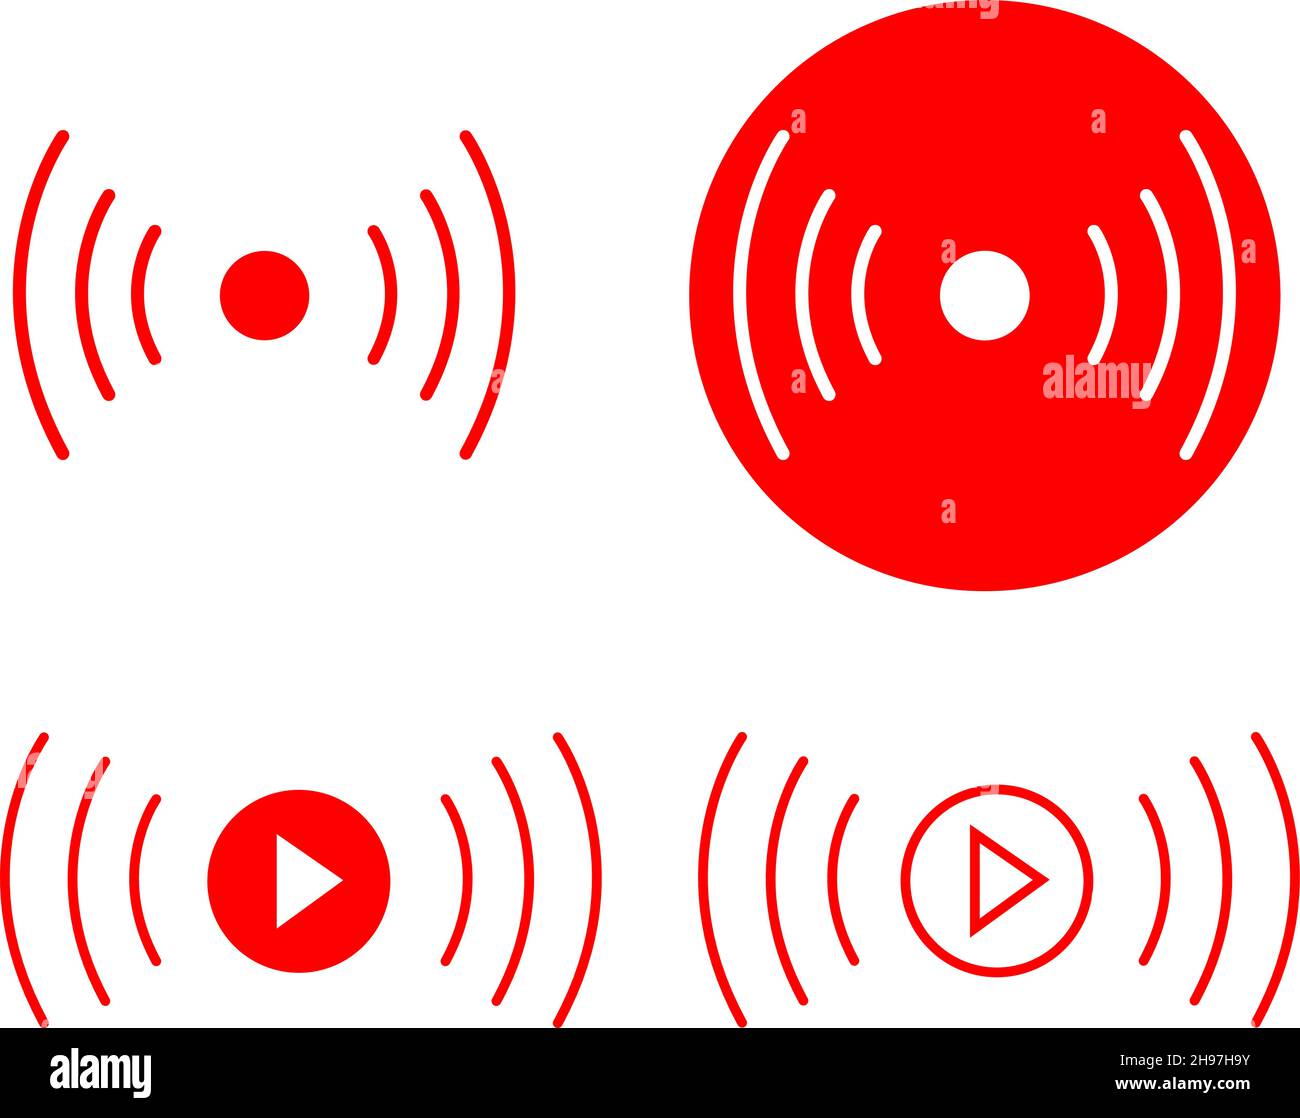 Live video streaming vector icons. Red buttons illustration for live streaming. Broadcasting, online video stream elements for TV blogs, shows, broadc Stock Vector